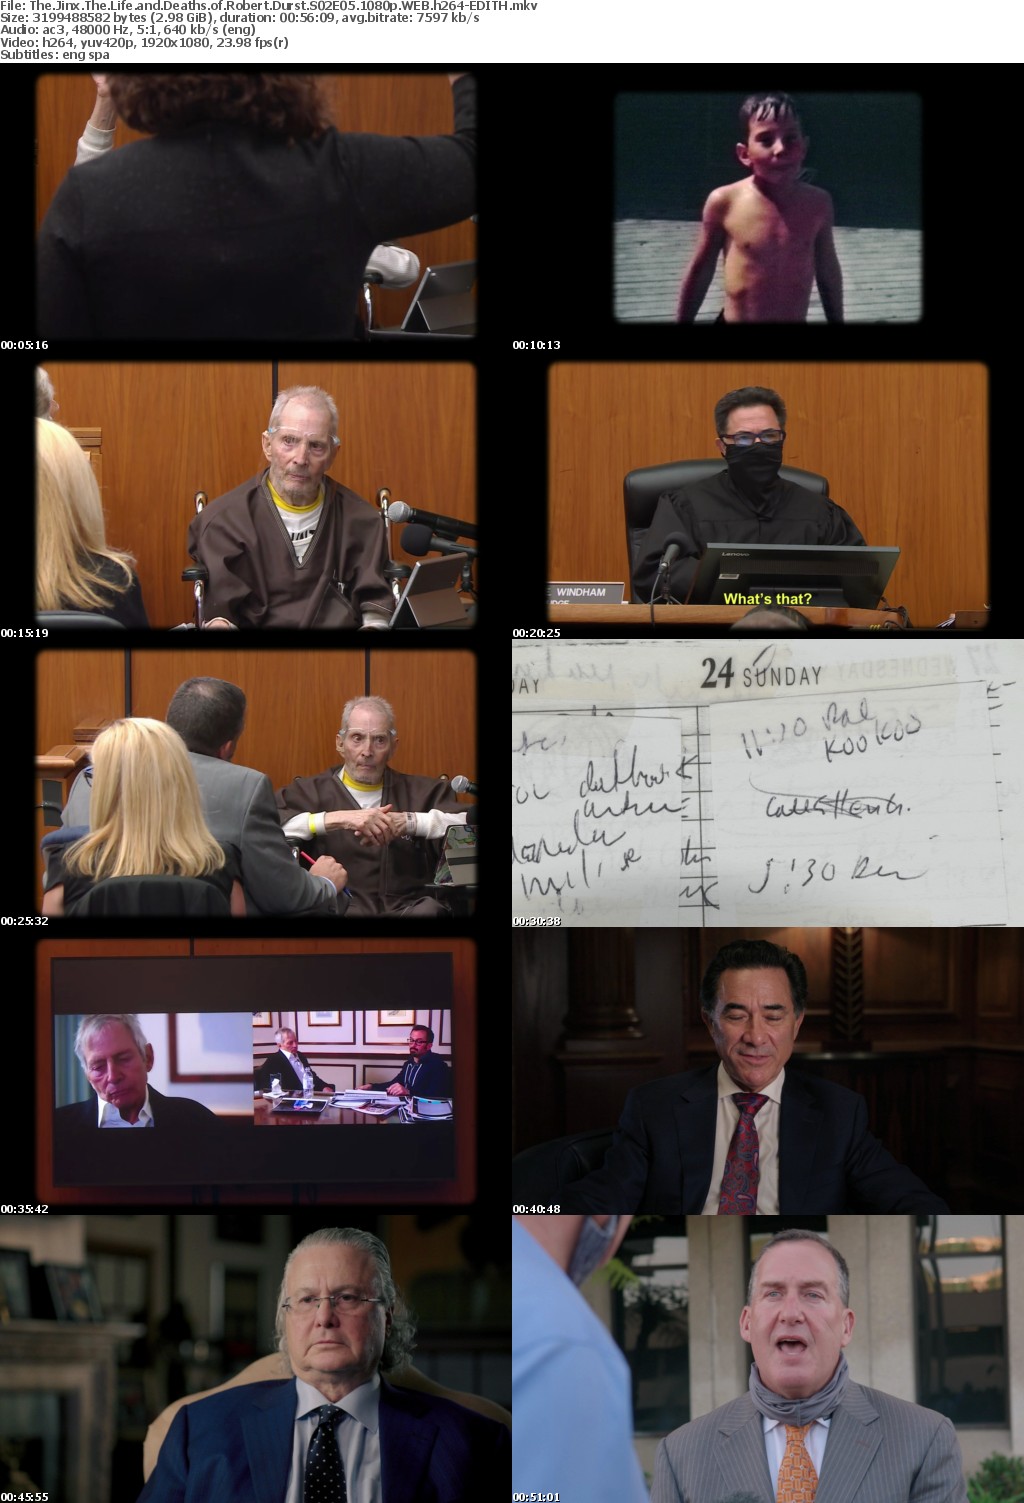 The Jinx The Life and Deaths of Robert Durst S02E05 1080p WEB h264-EDITH